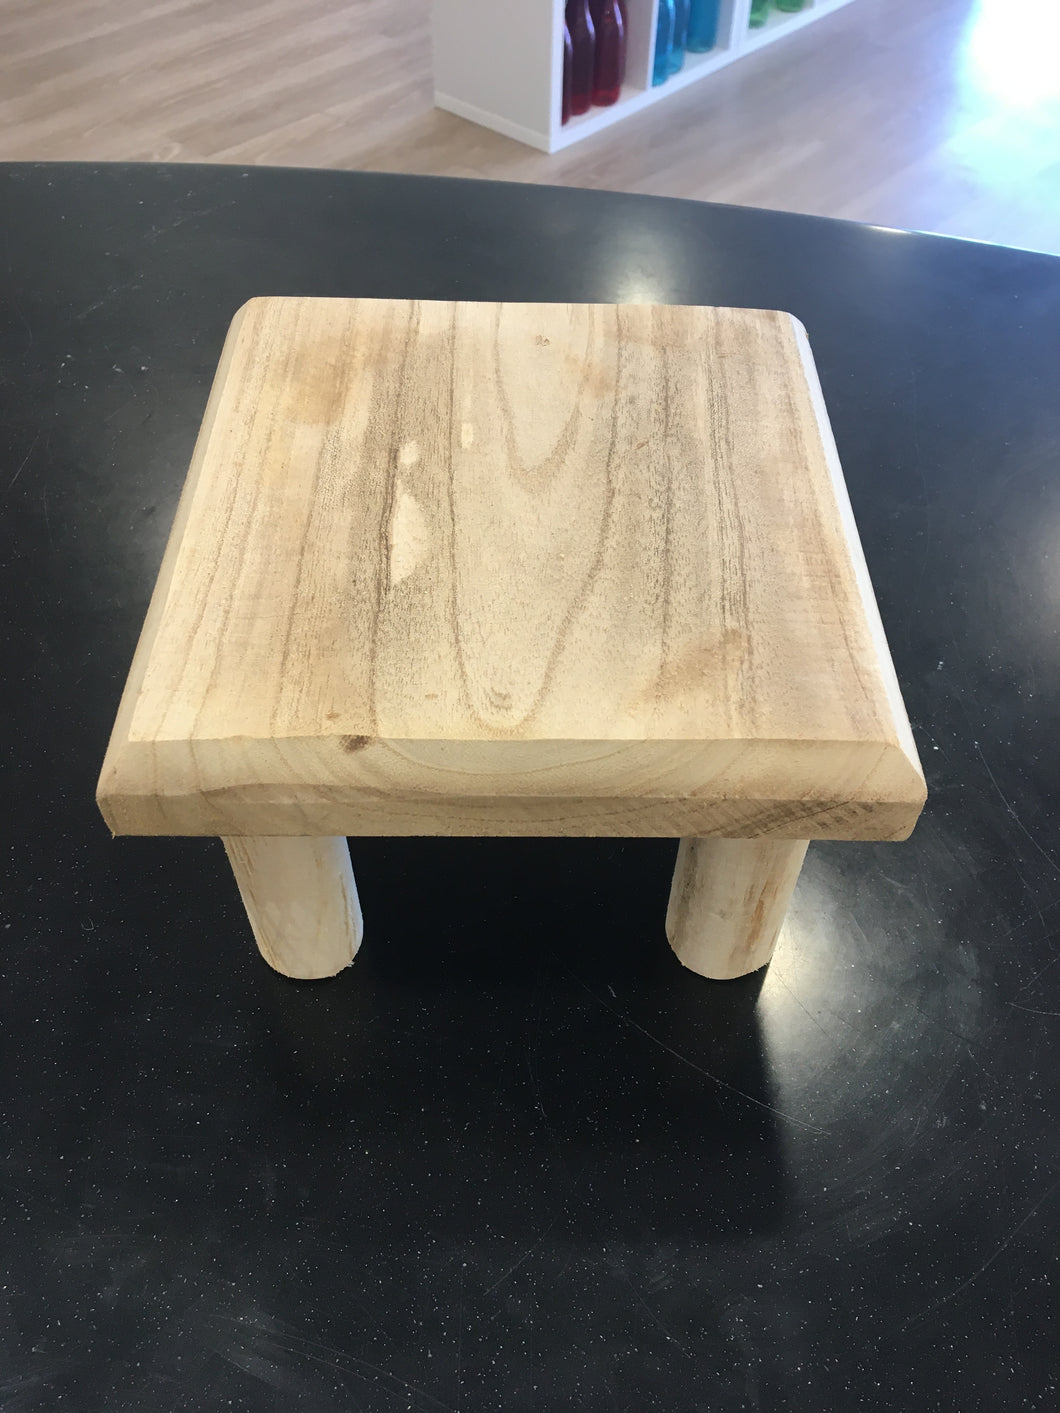 Natural wooden stand small